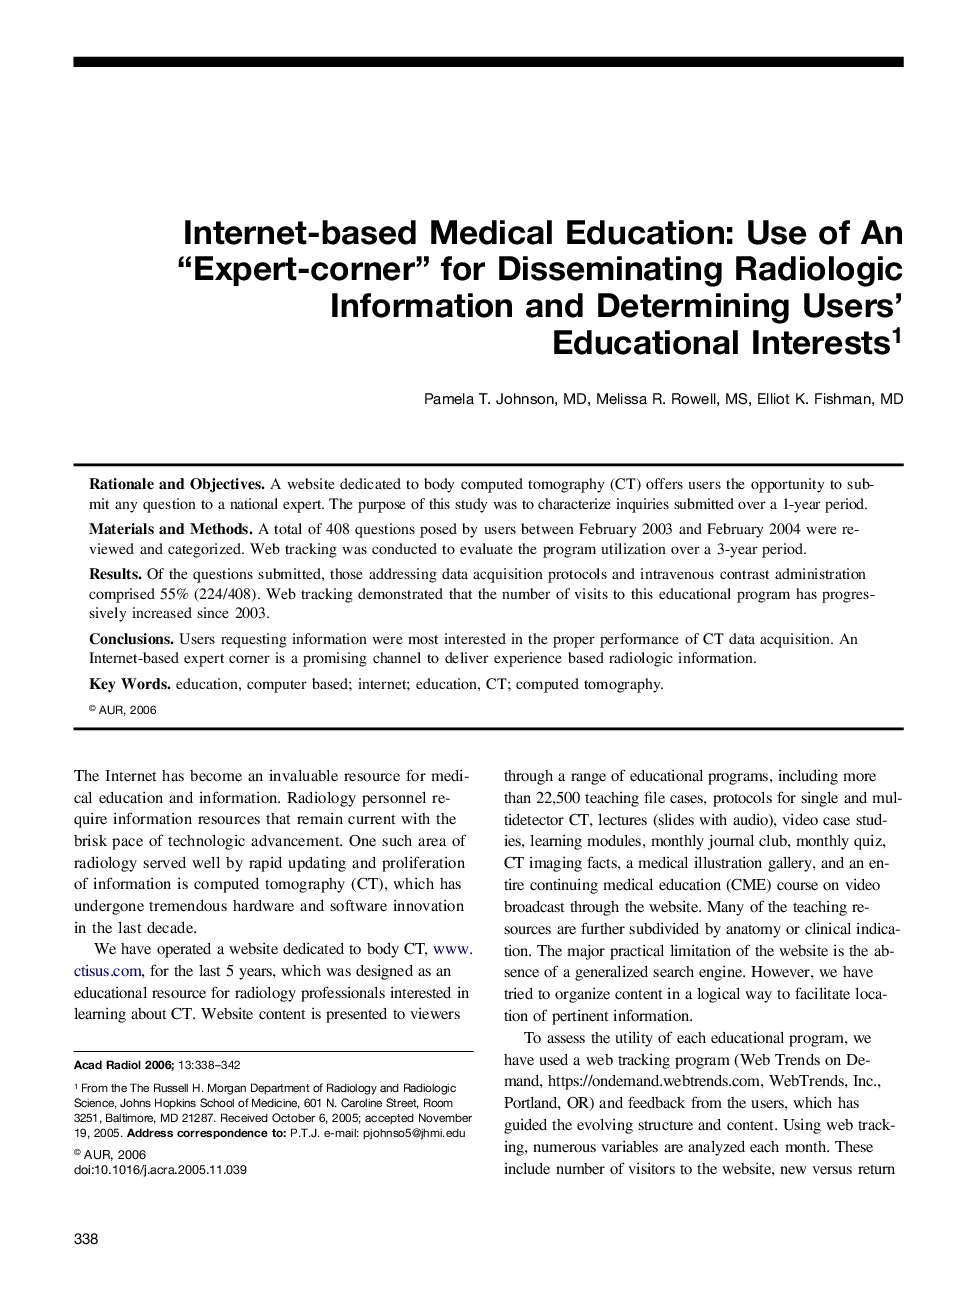 Internet-based Medical Education: Use of An “Expert-corner” for Disseminating Radiologic Information and Determining Users' Educational Interests